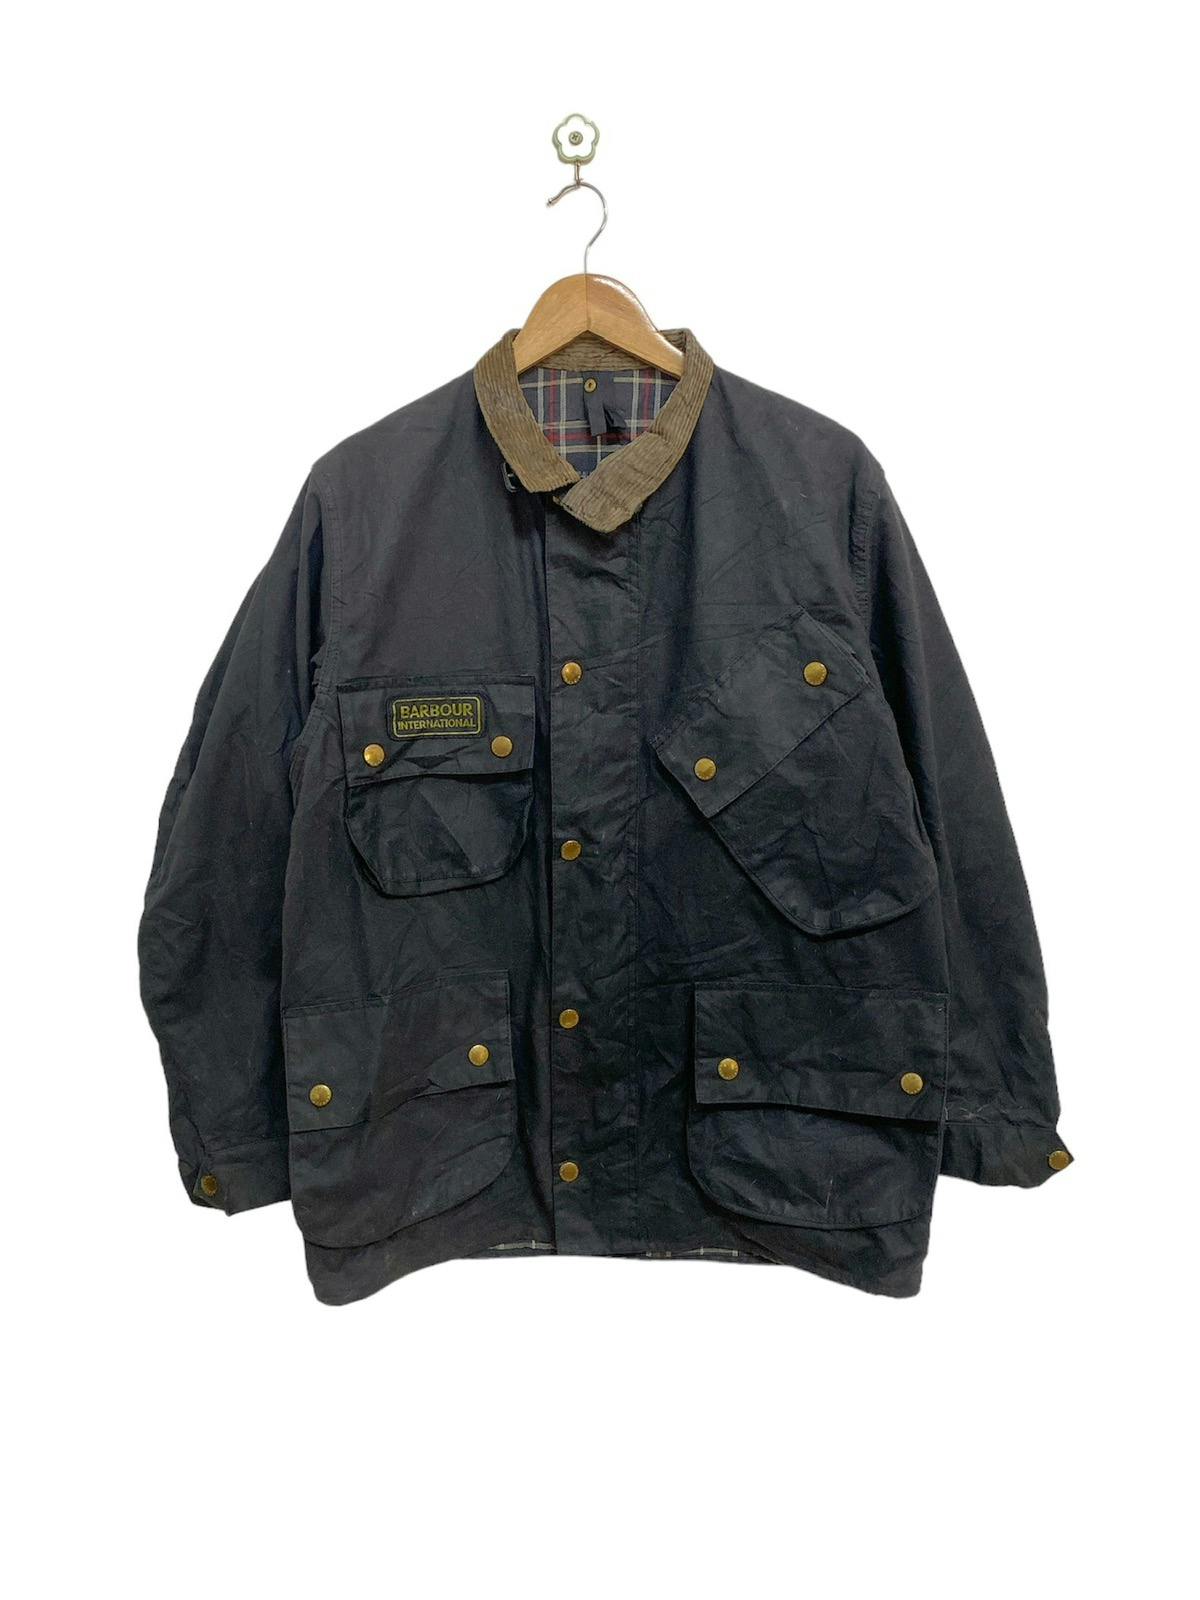 Barbour A7 International Suit Wax Jacket Made in England - 1